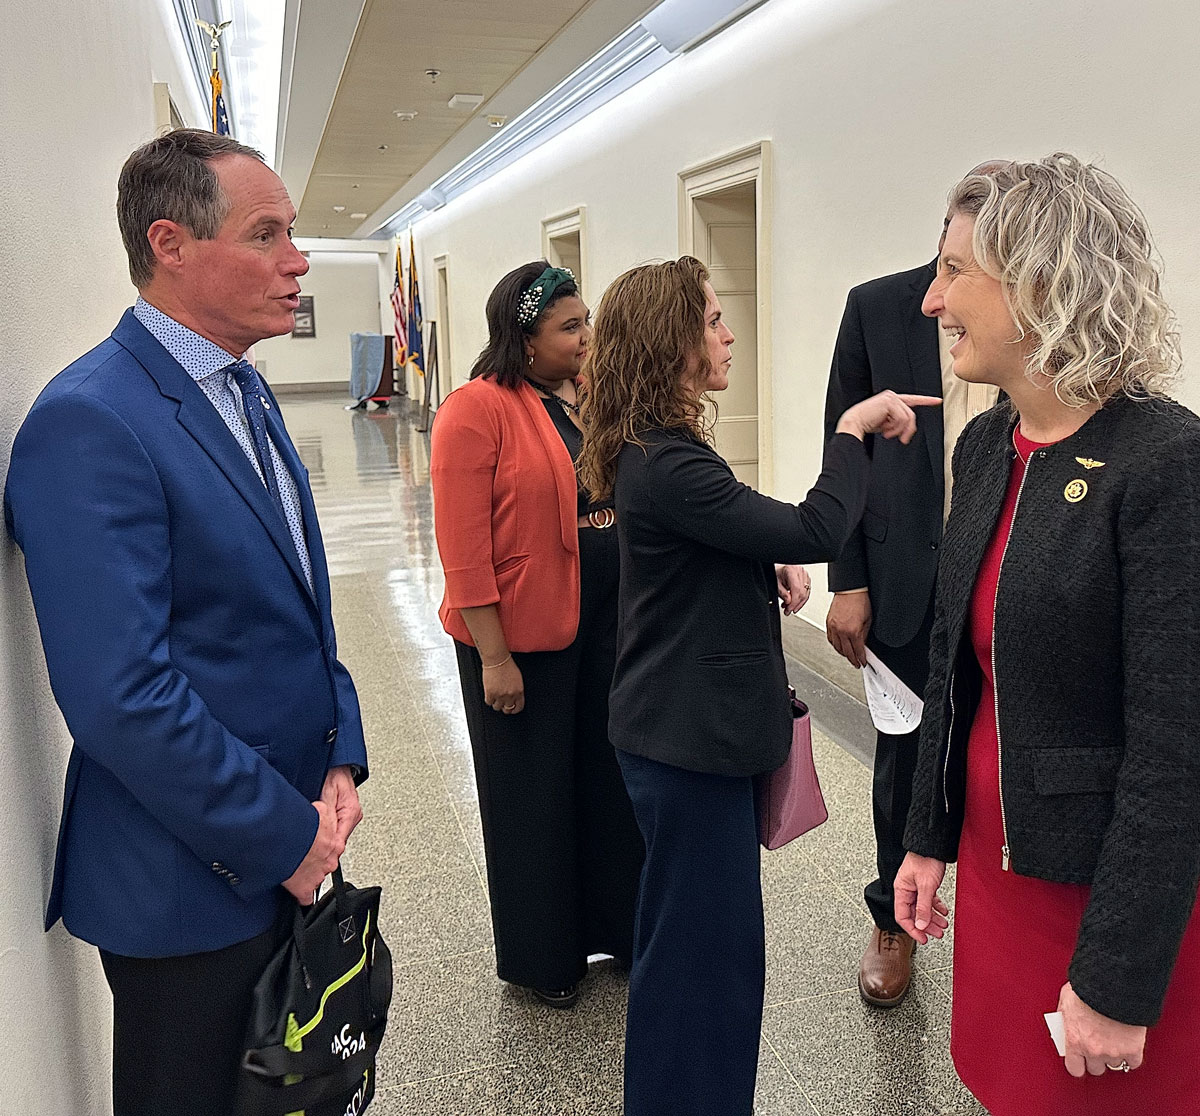 In a meeting today with Rep. Jennifer Kiggans, member credit unions and League highlighted a number of legislative priorities, including funding the federal government and providing credit unions additional opportunities to help the nation's small businesses.